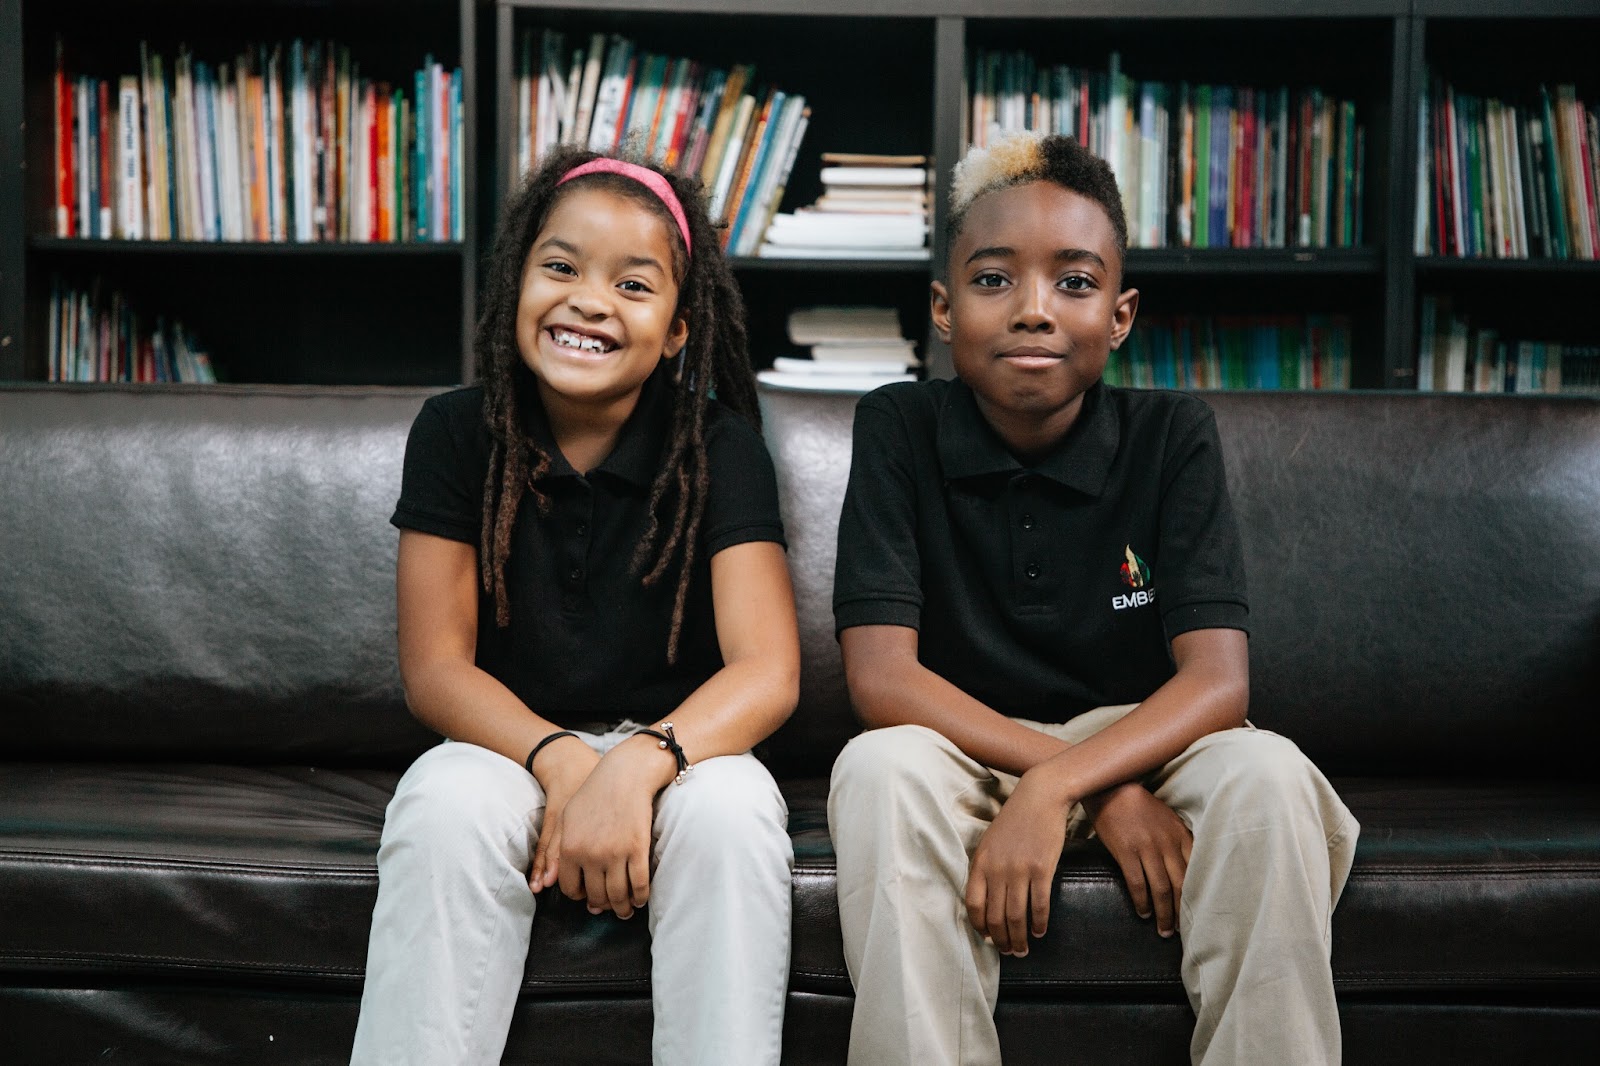 Two Ember Charter Schools students sit on a bench in the school library.